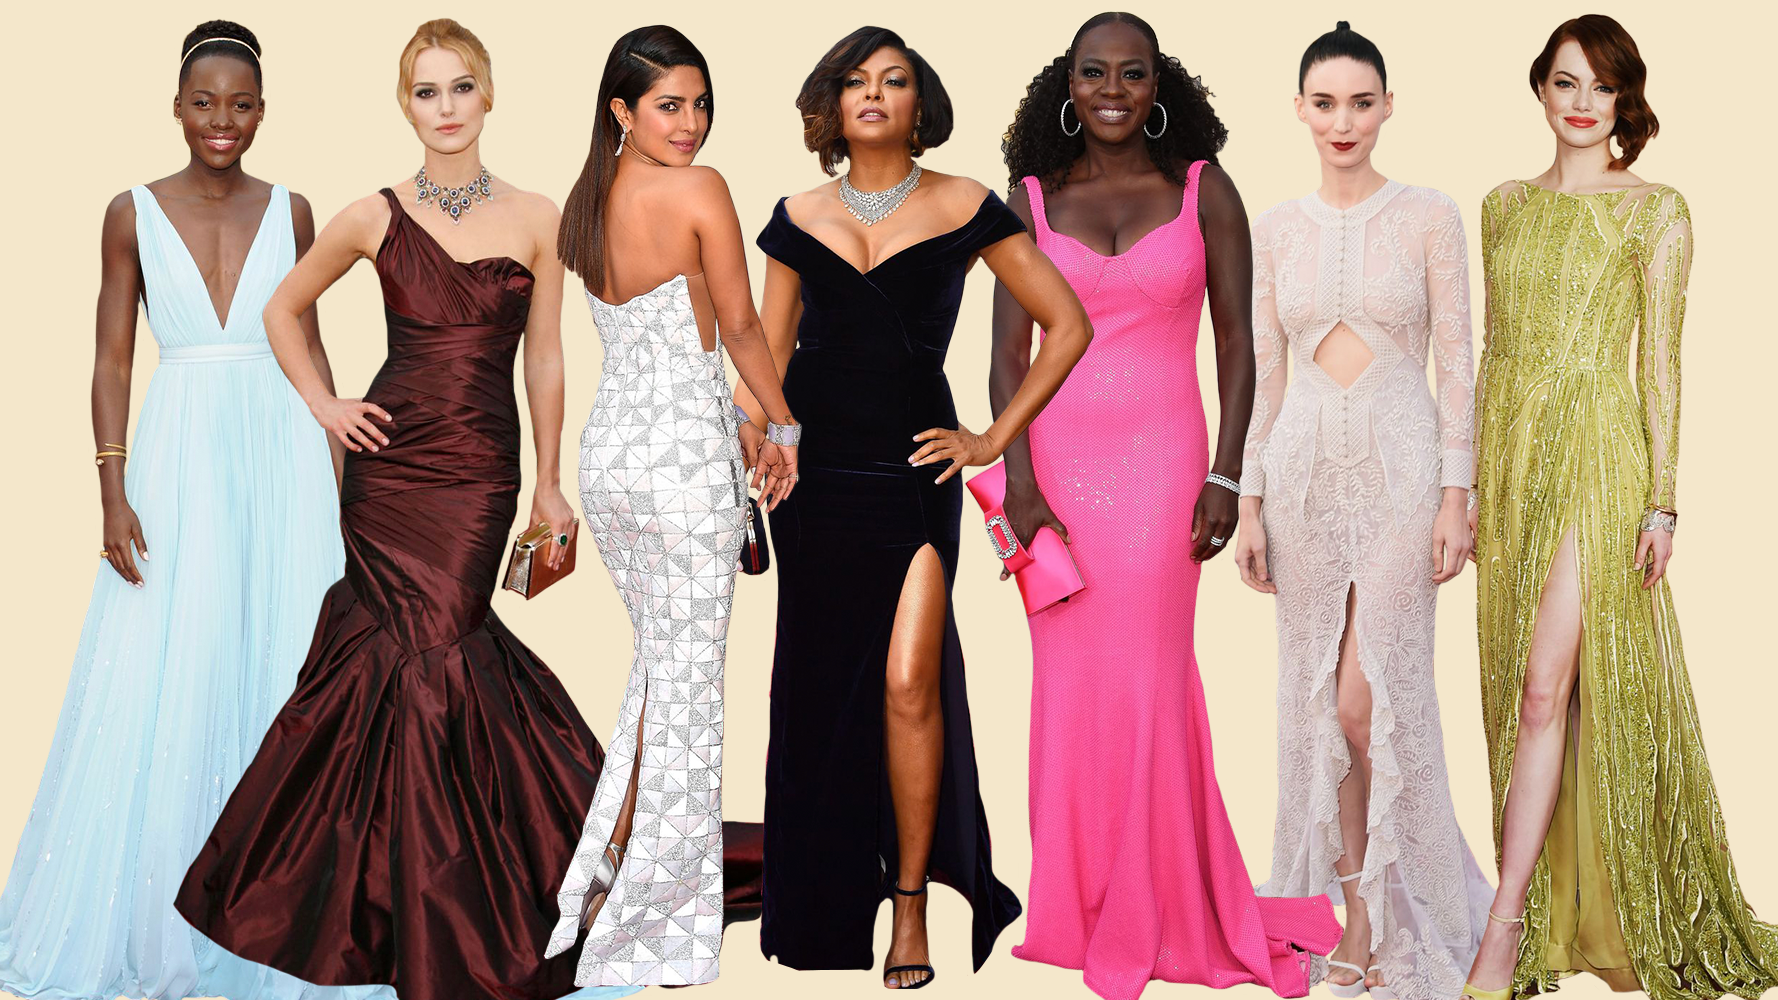 Oscars: 20 Best Dresses of the Past 20 Years